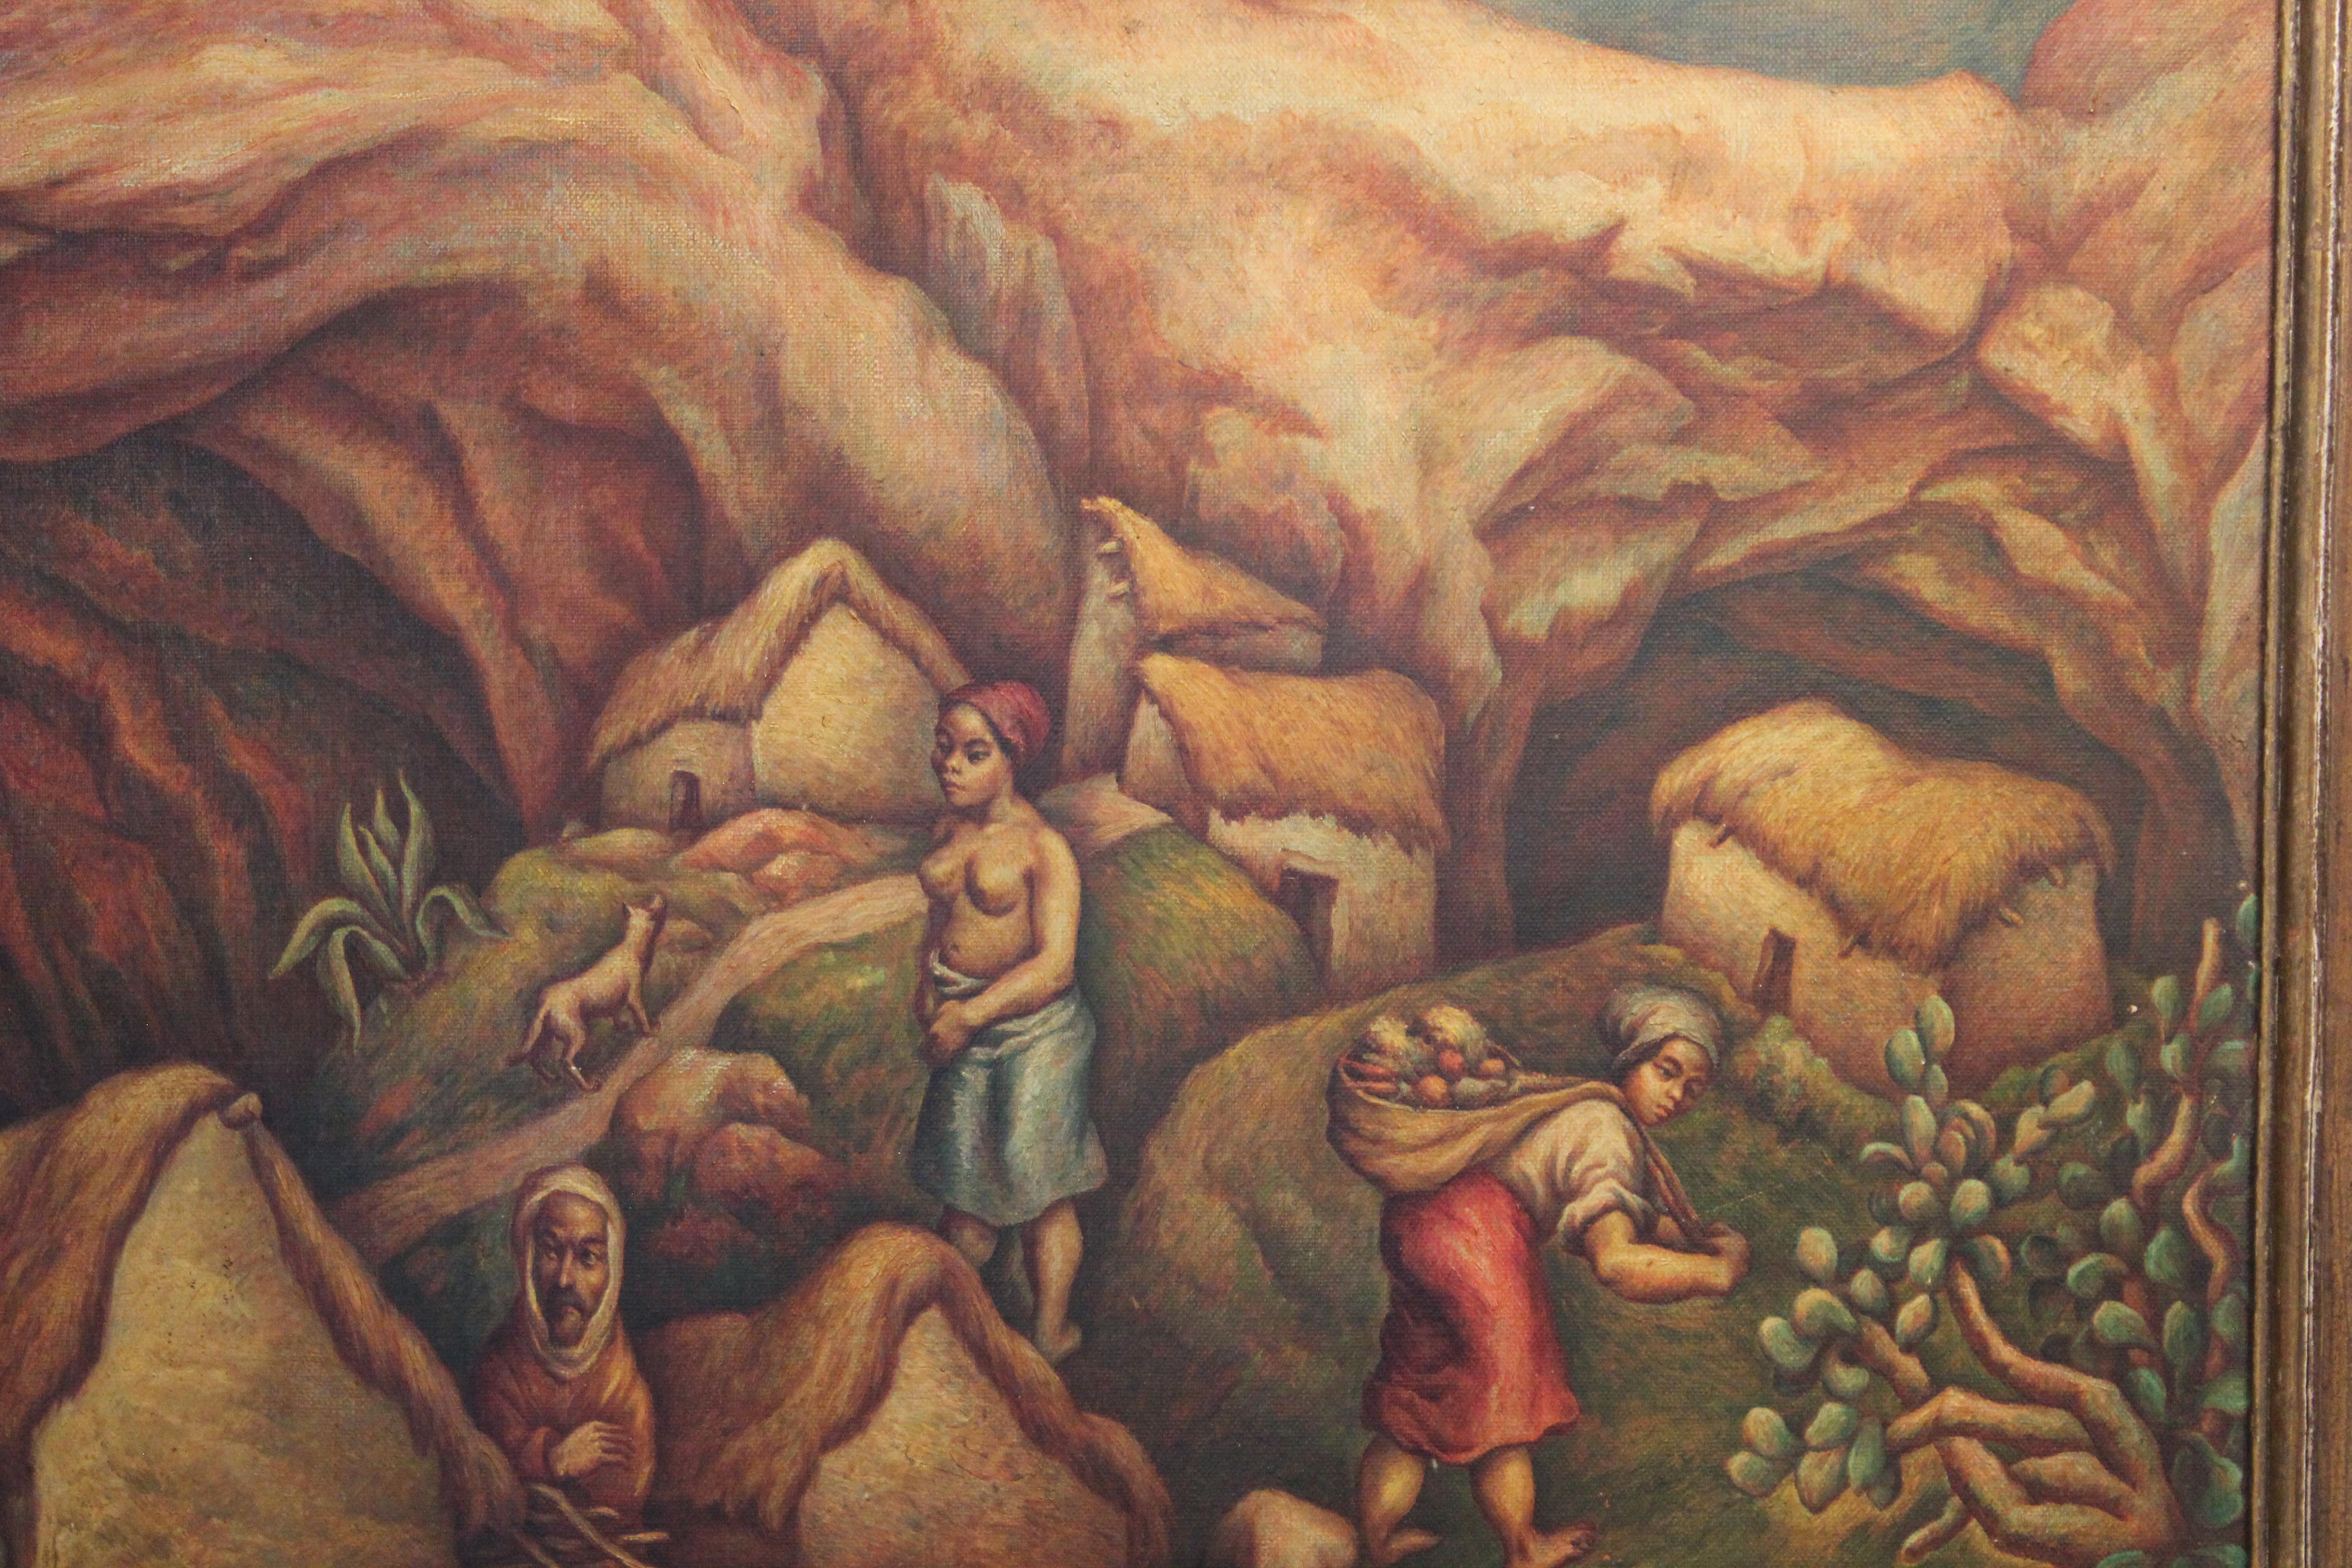 Figurative, warm tonal painting of people most likely of North African descent. The men are depicted completely clothed and sitting on the ground while the women are more exposed and gathering food. The scene also includes animals such as chickens